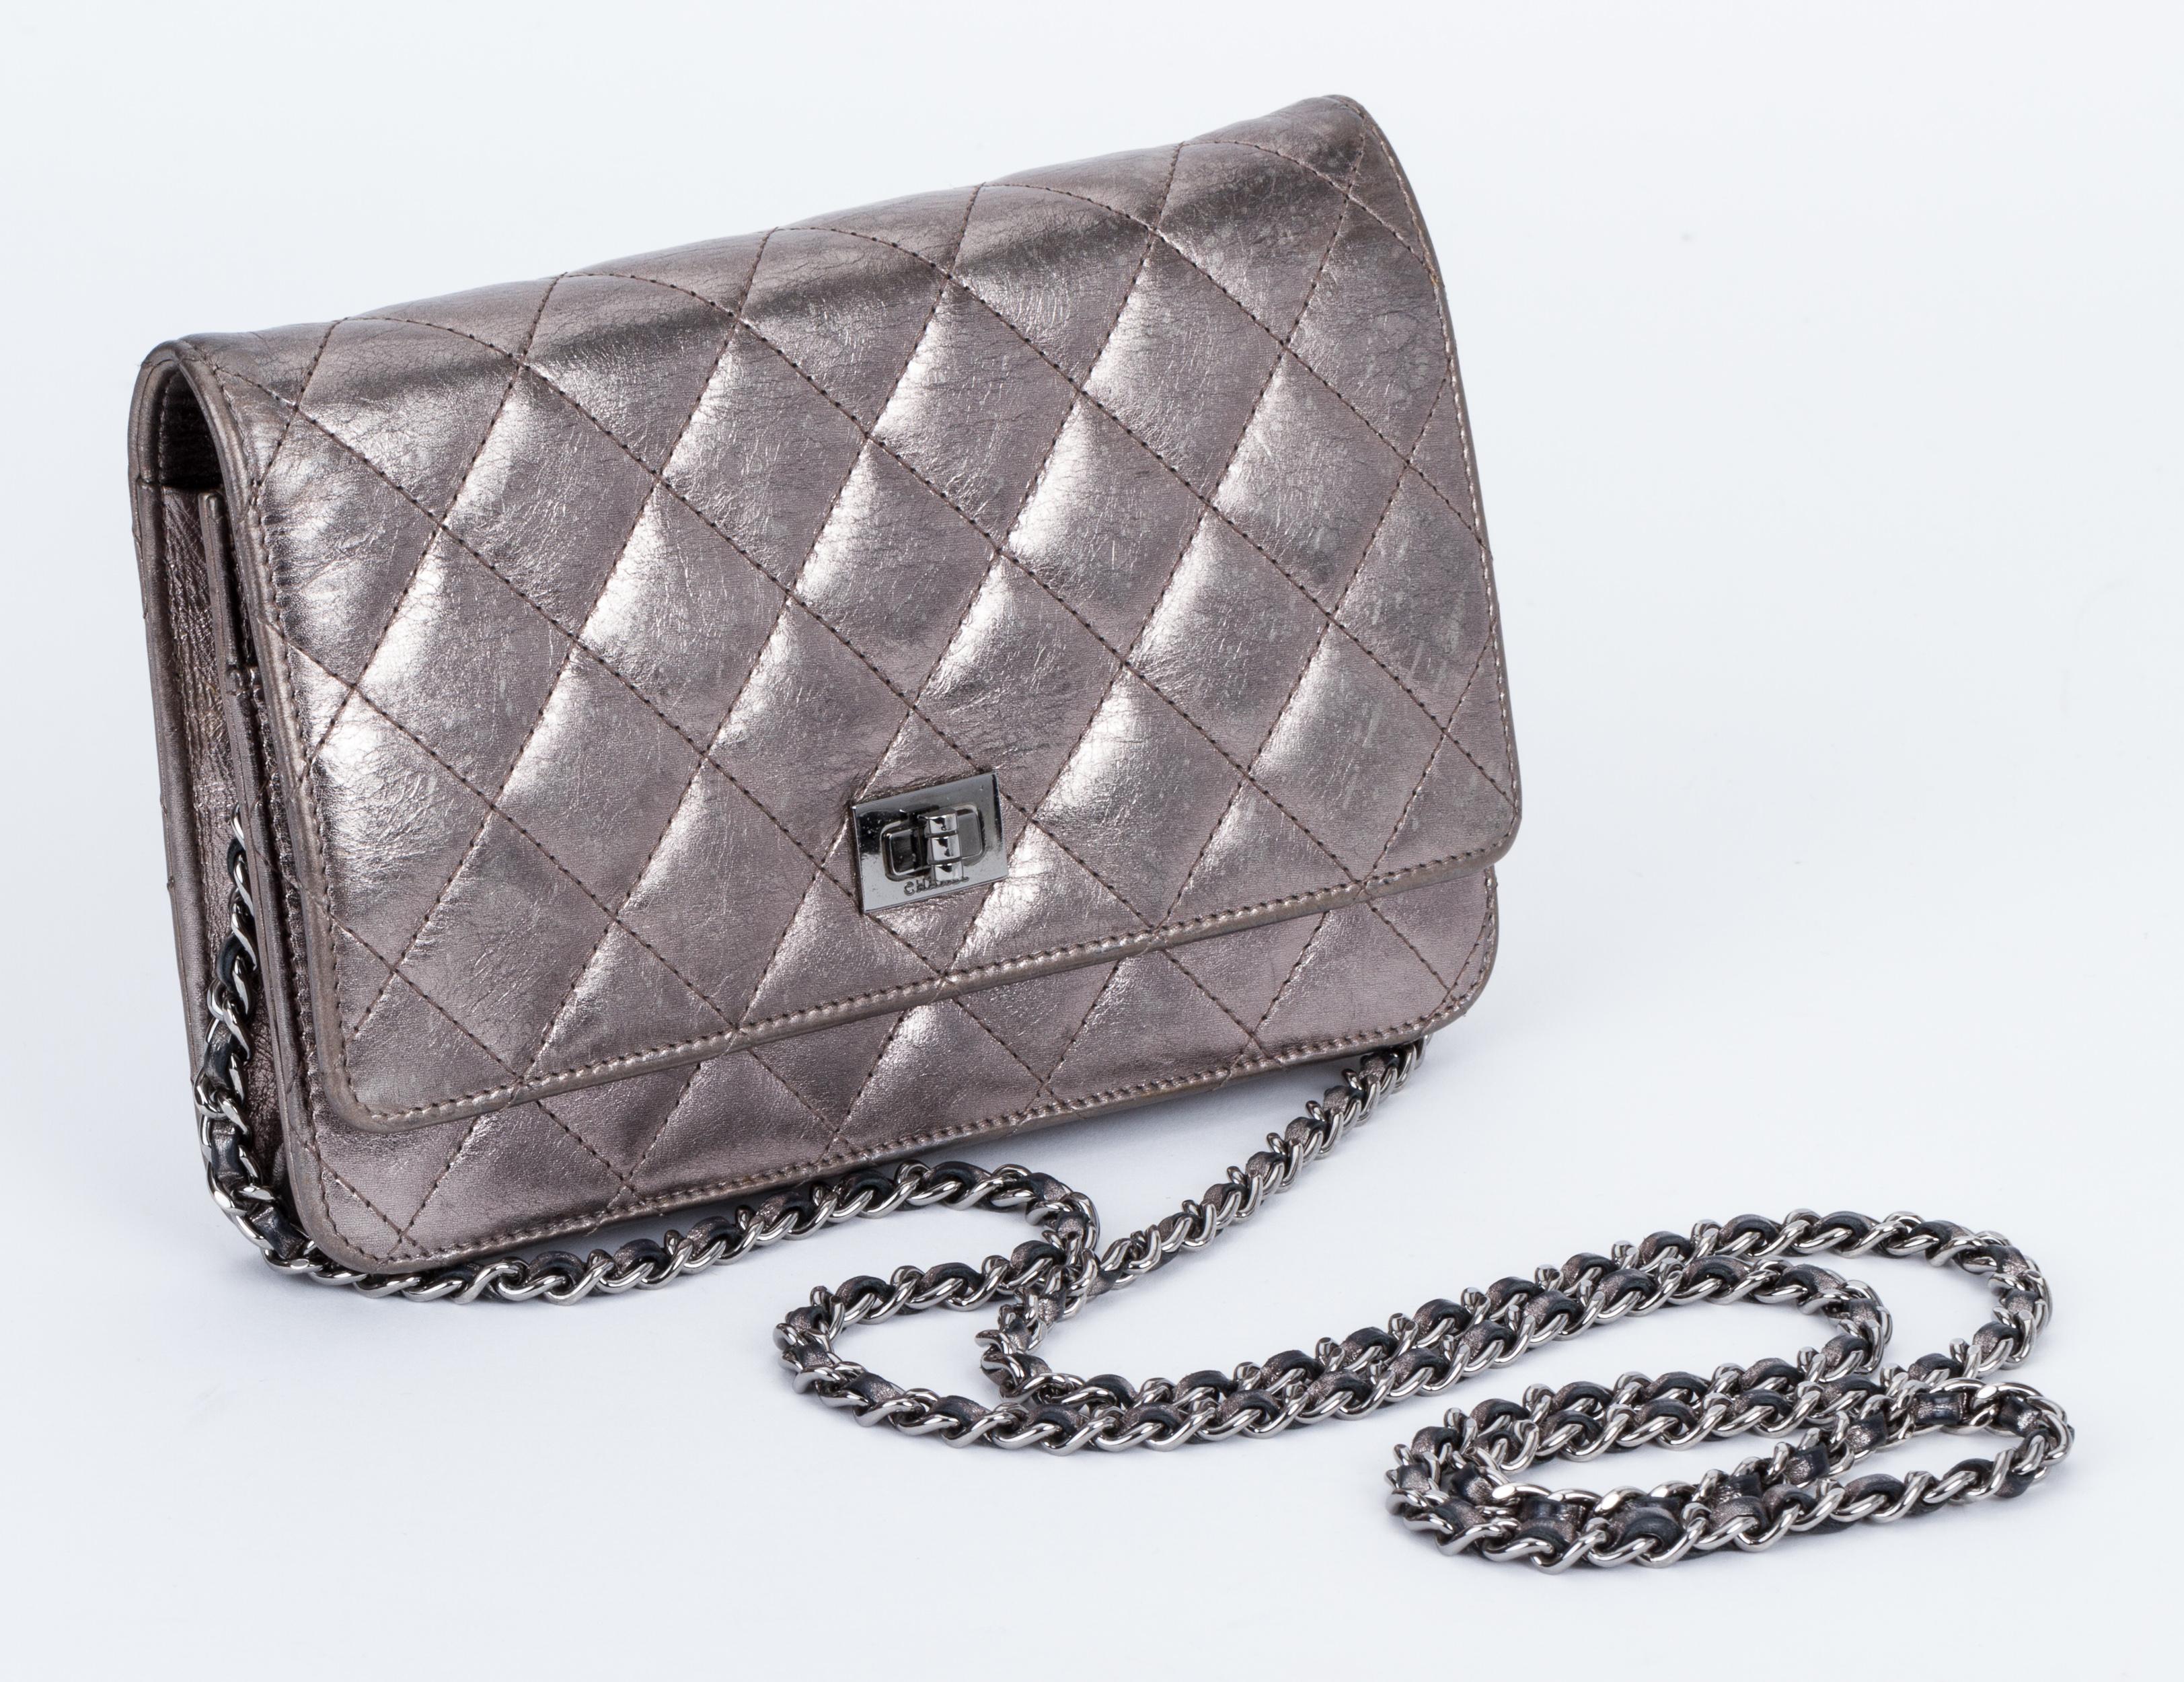 Chanel reissue quilted pewter leather cross body wallet on a chain. Shoulder drop 25